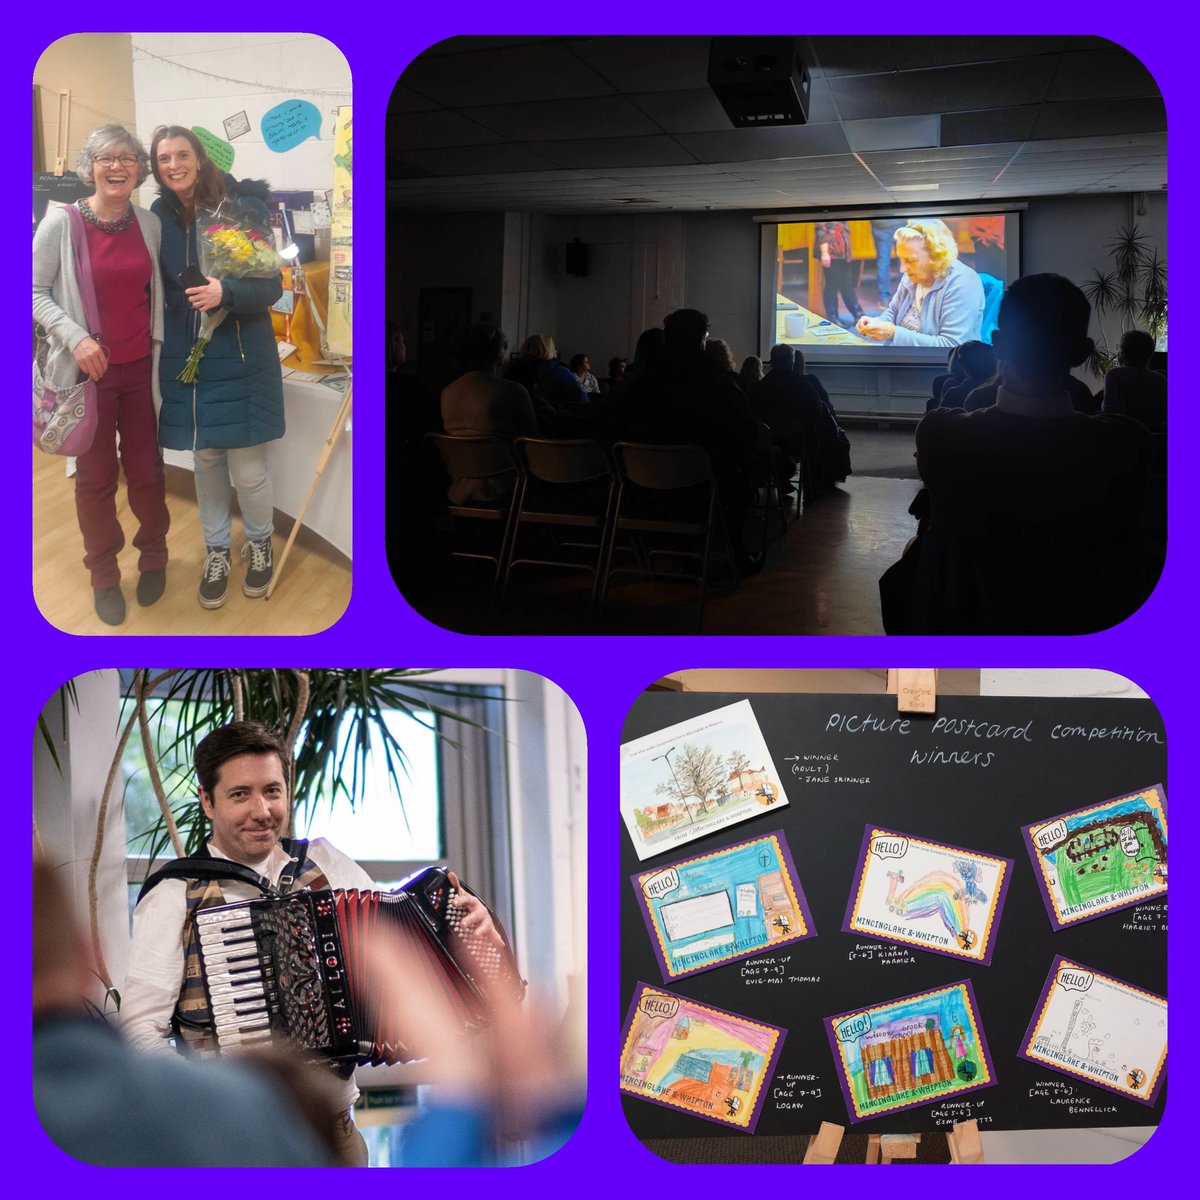 Our #ProudToBe film launch was a real #community celebration - residents, families and children joined us to enjoy our co-created film by @bentallamy about #prideofplace, and @jimcausley presented our new wassail song 🎶 Thank you everyone for such an amazing experience 🎉